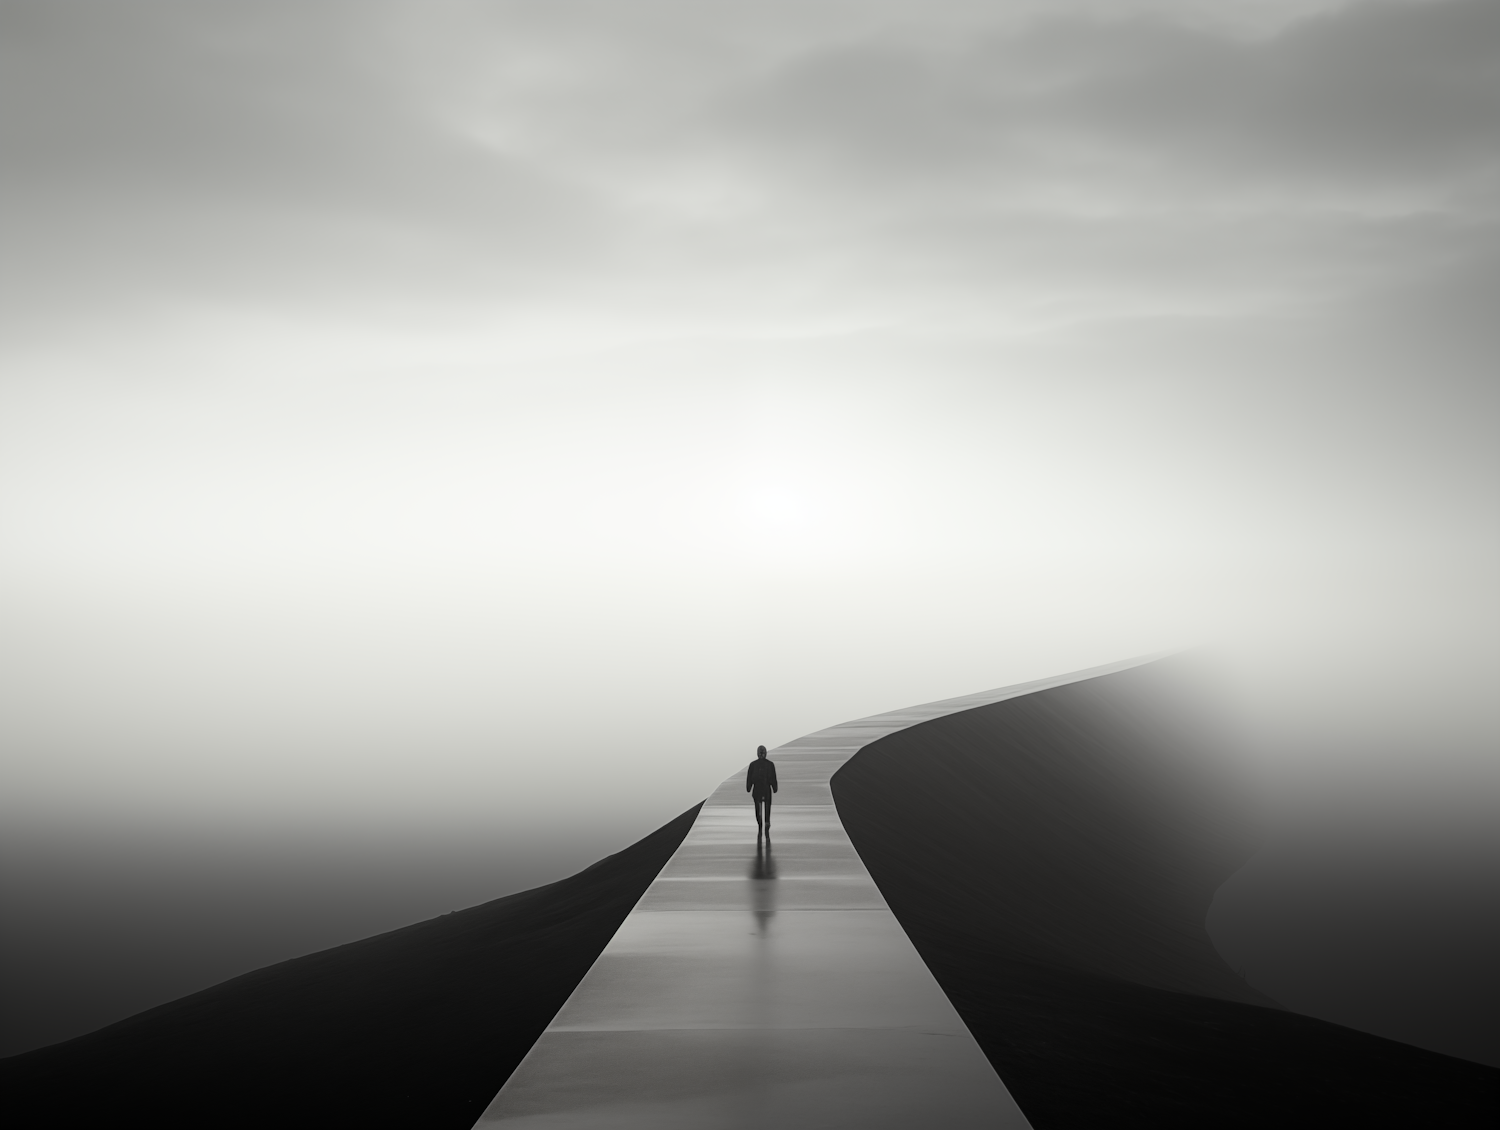 Solitary Figure in a Foggy Abstract Landscape